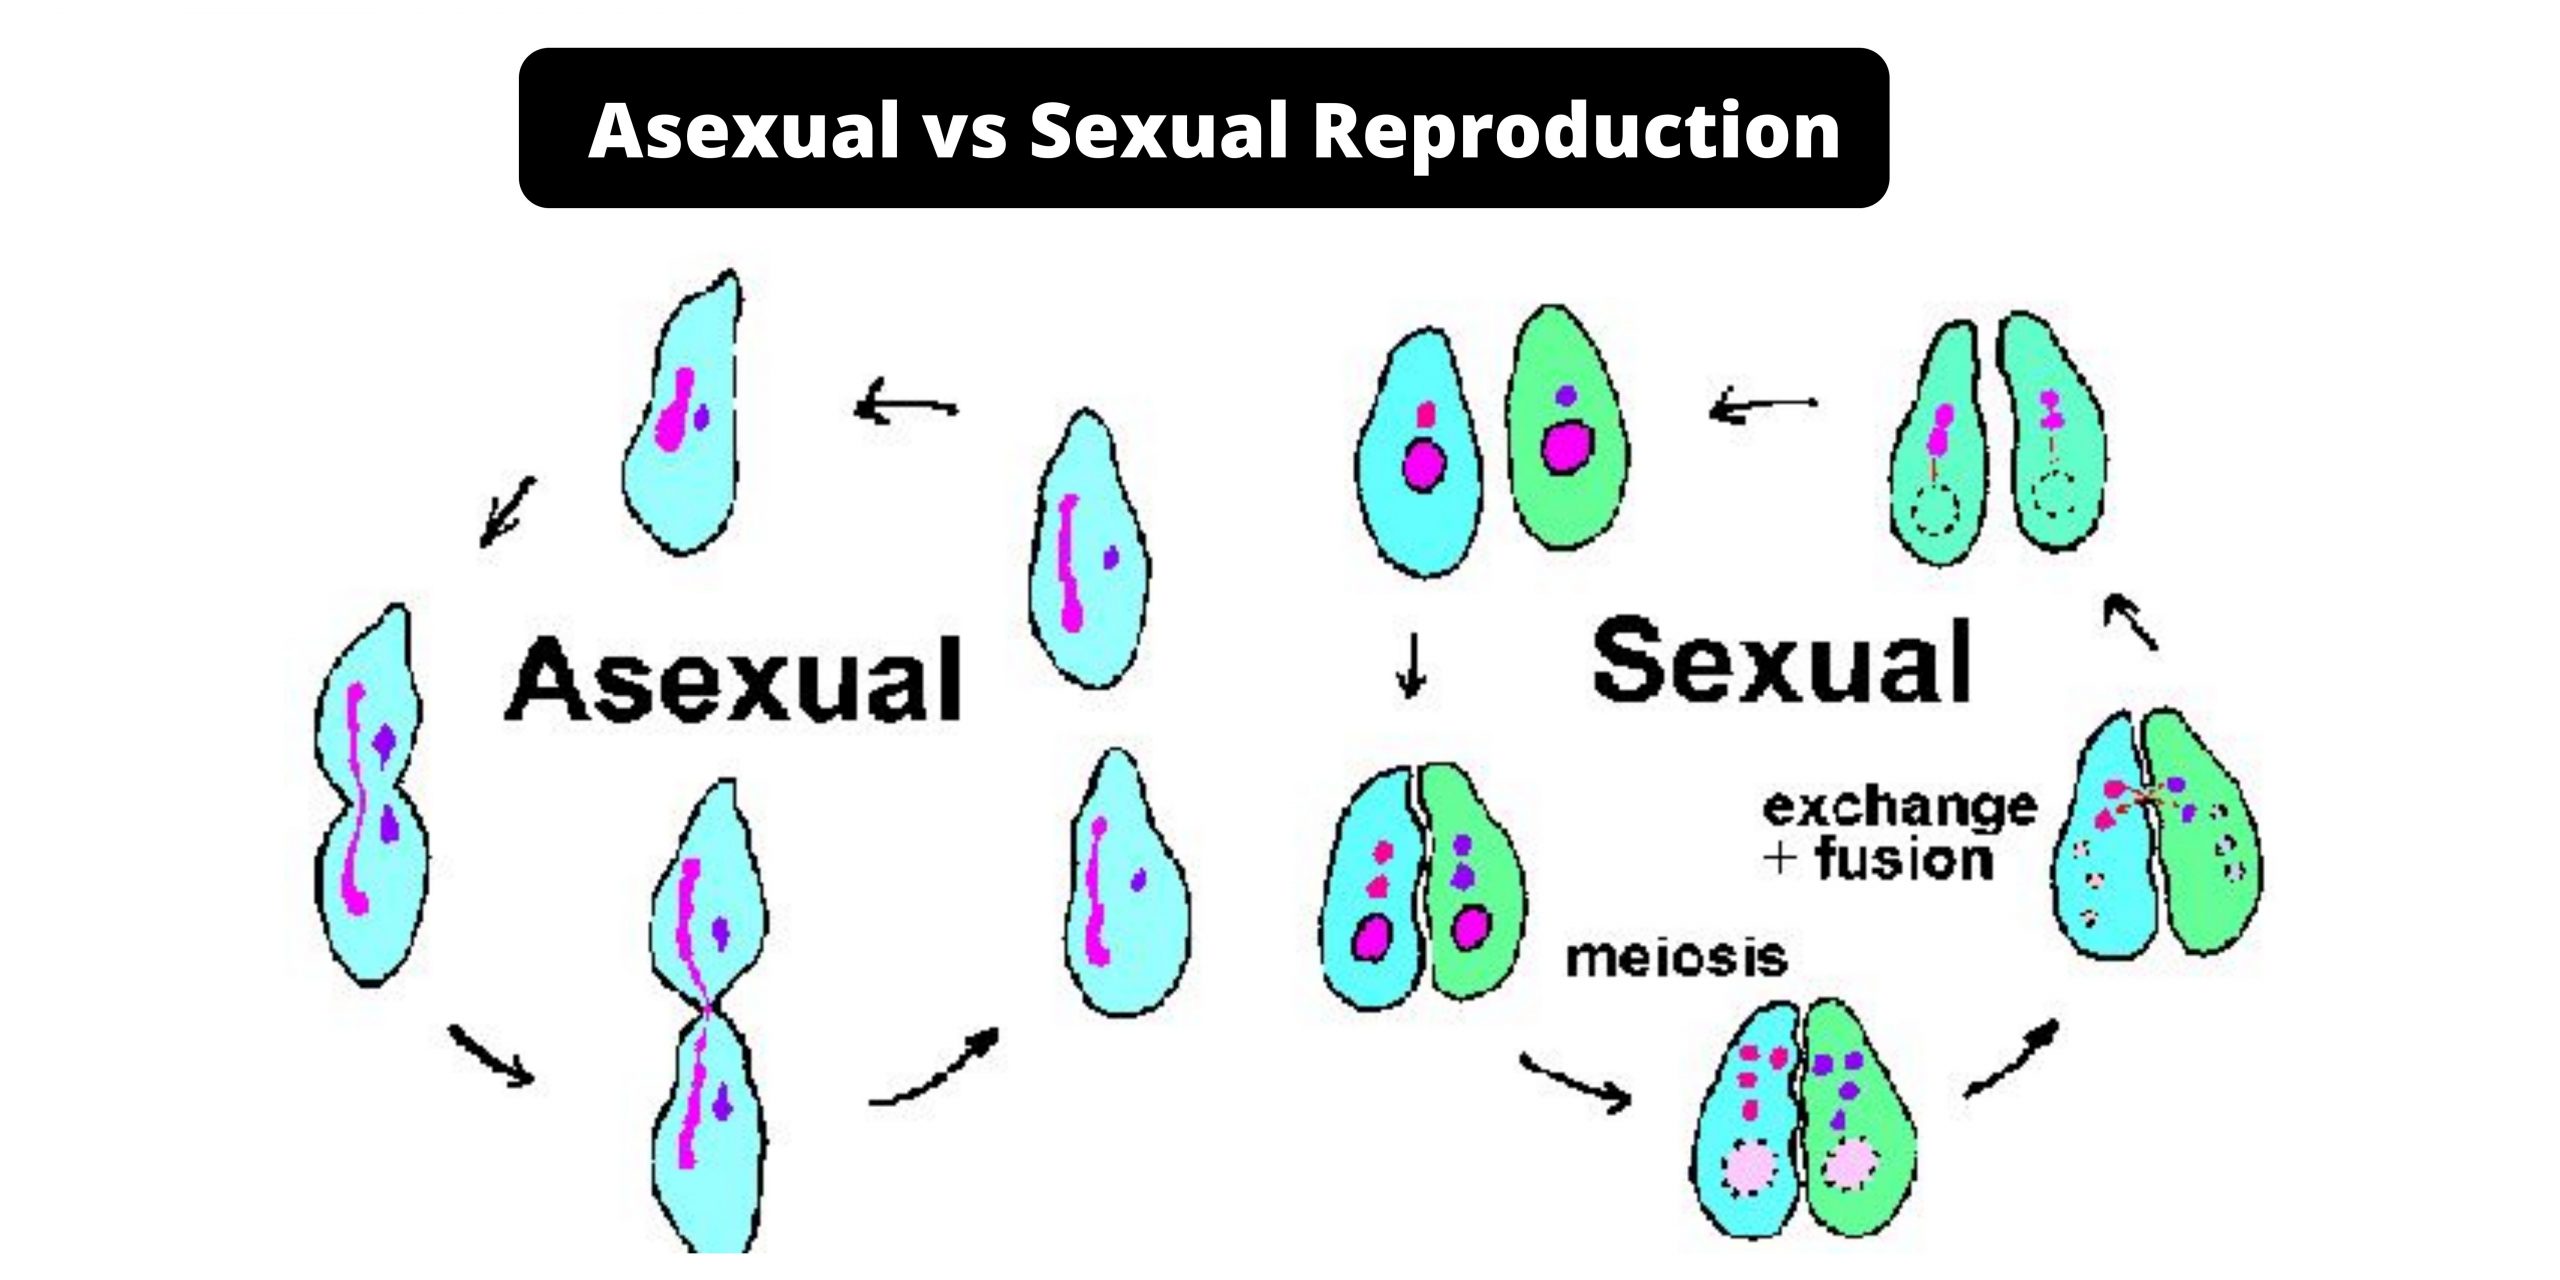 Difference Between Asexual and Sexual Reproduction